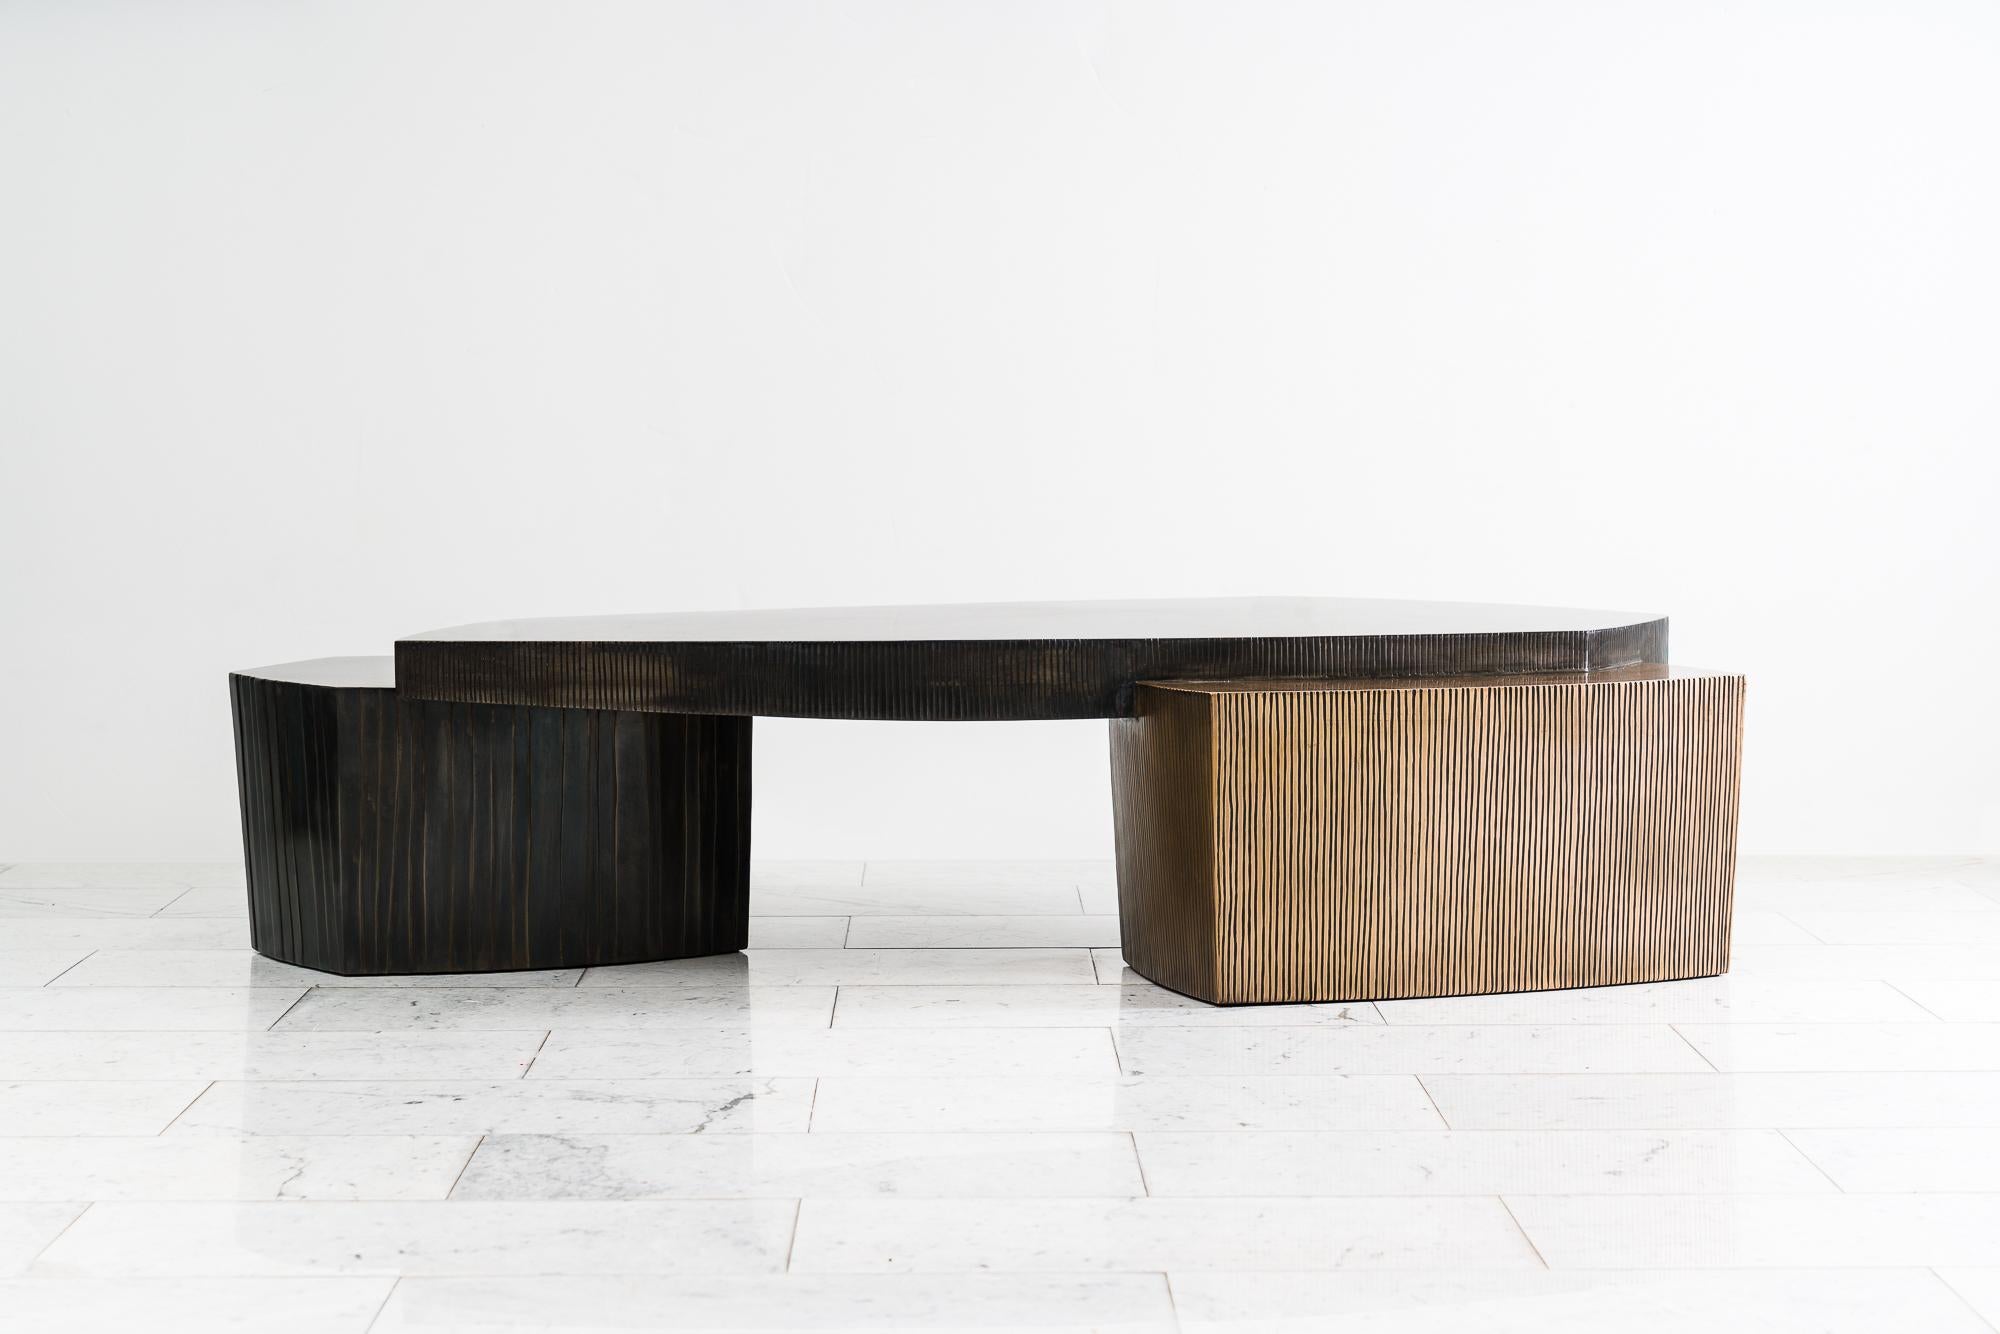 The Il Ponte Low Table III (The Bridge) was inspired by Constructivism and Frank Lloyd Wright’s cantilevered homes, Gary Magakis channels architectural elements in his work. Though the table’s geometric sections appear to have sharp edges, they are